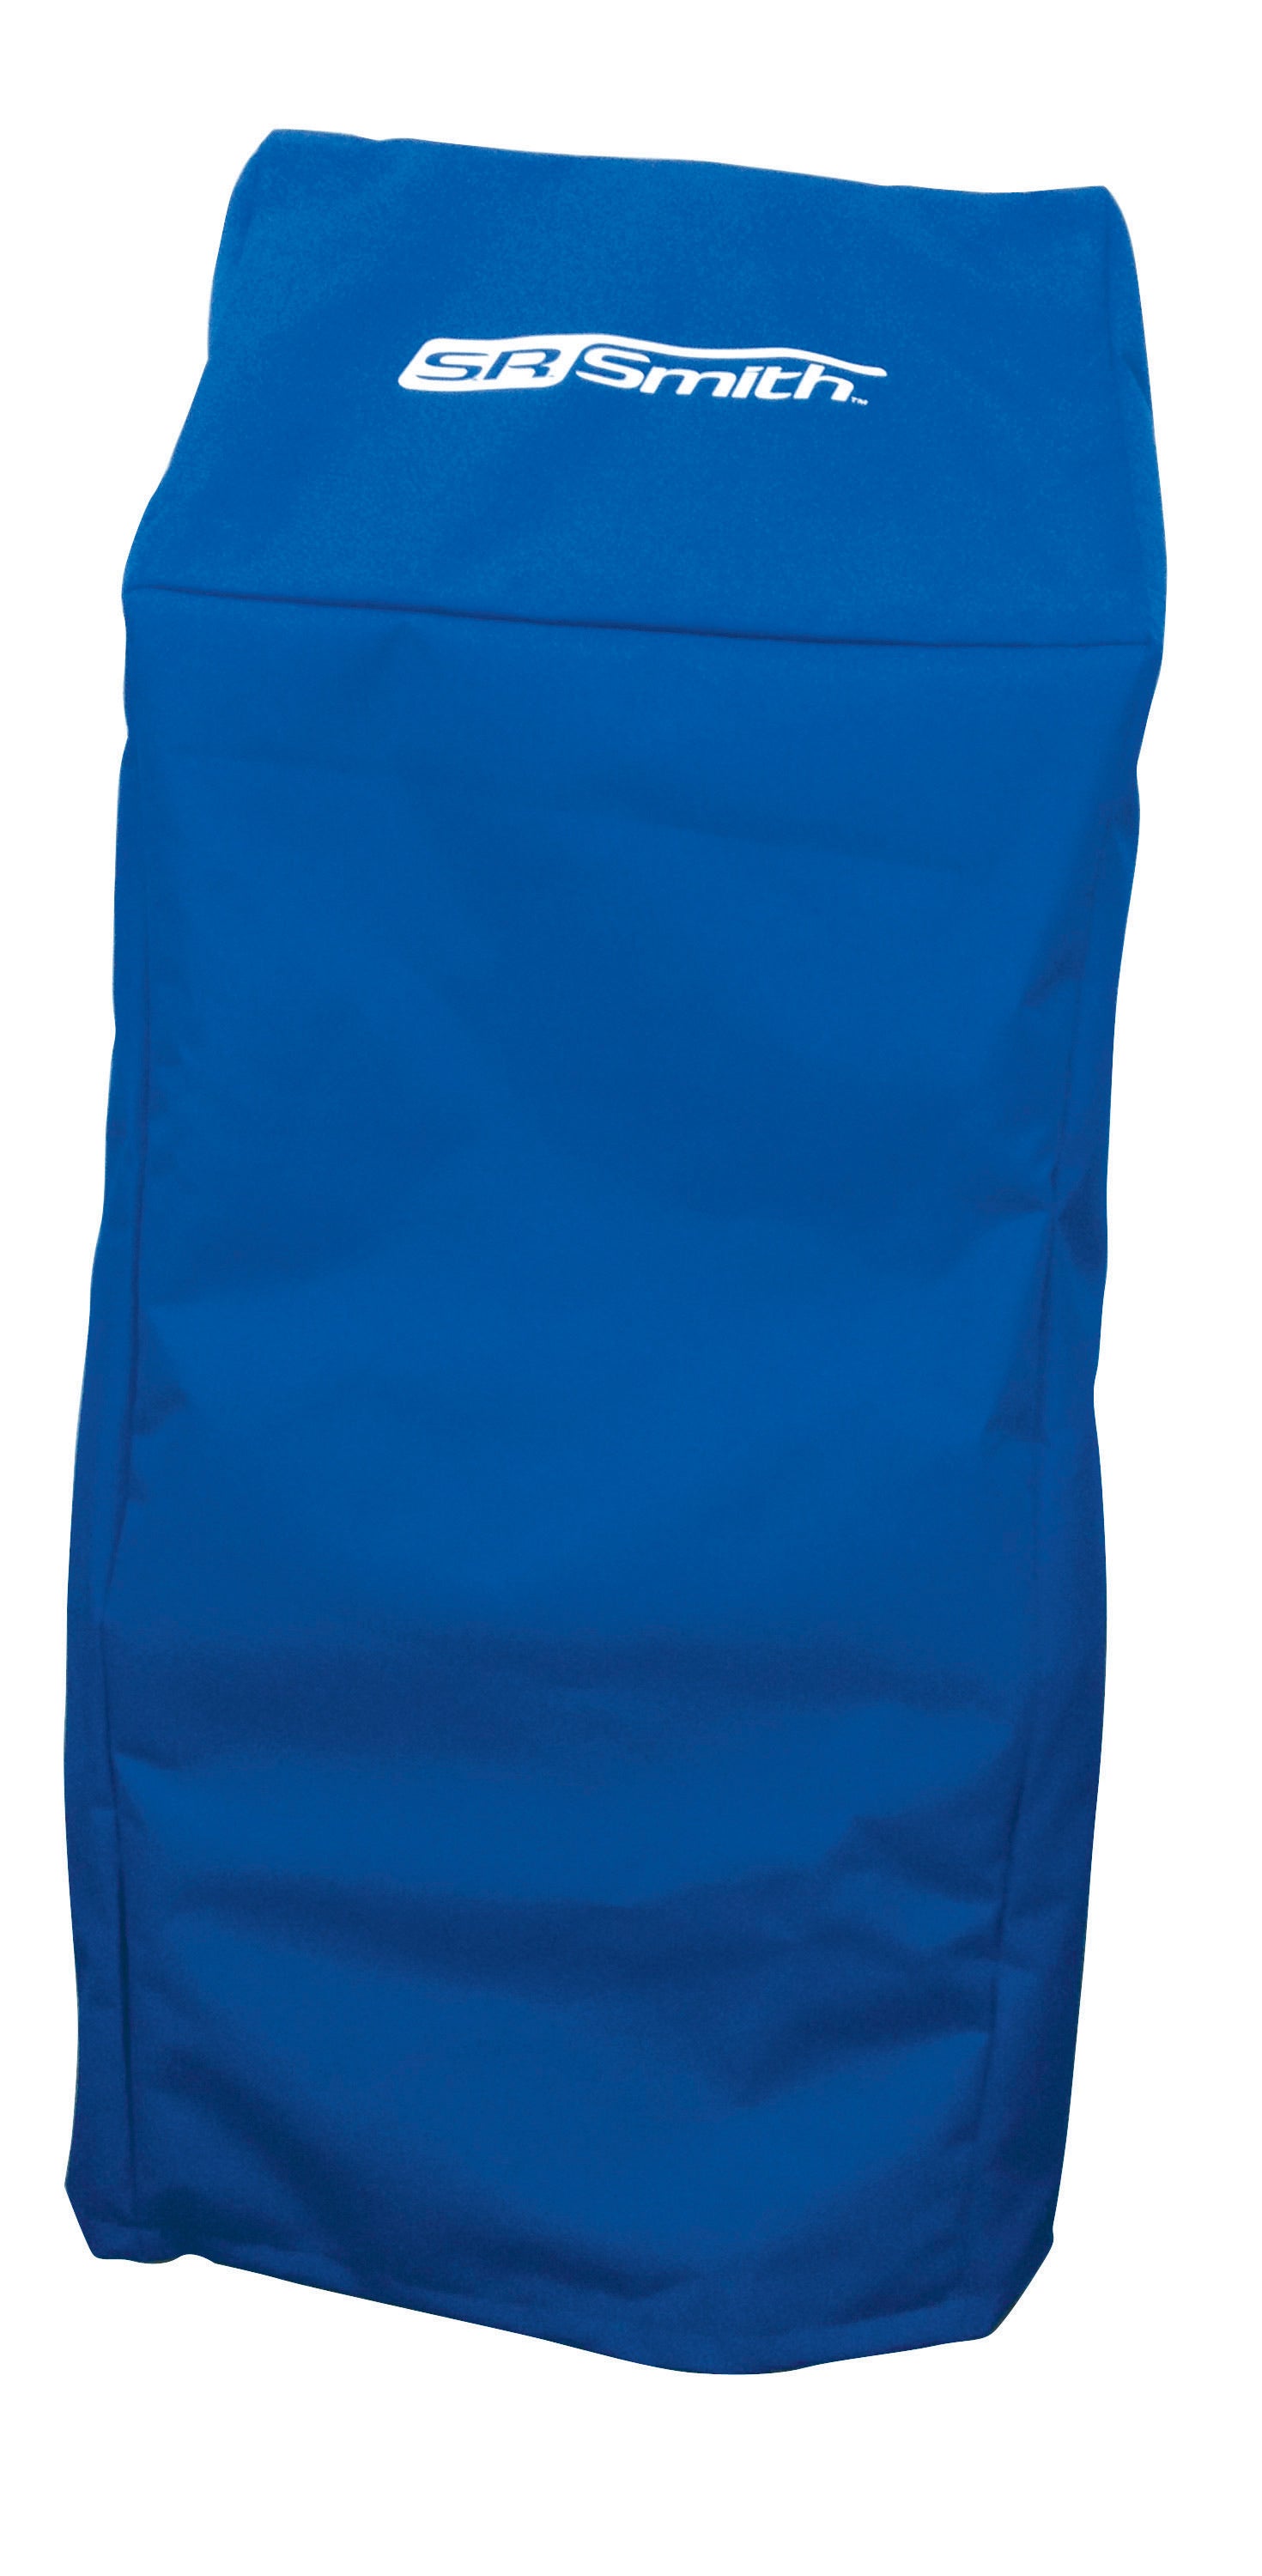 S.R. Smith multiLift Folding Seat Cover - 500-5100FC-The Pool Supply Warehouse